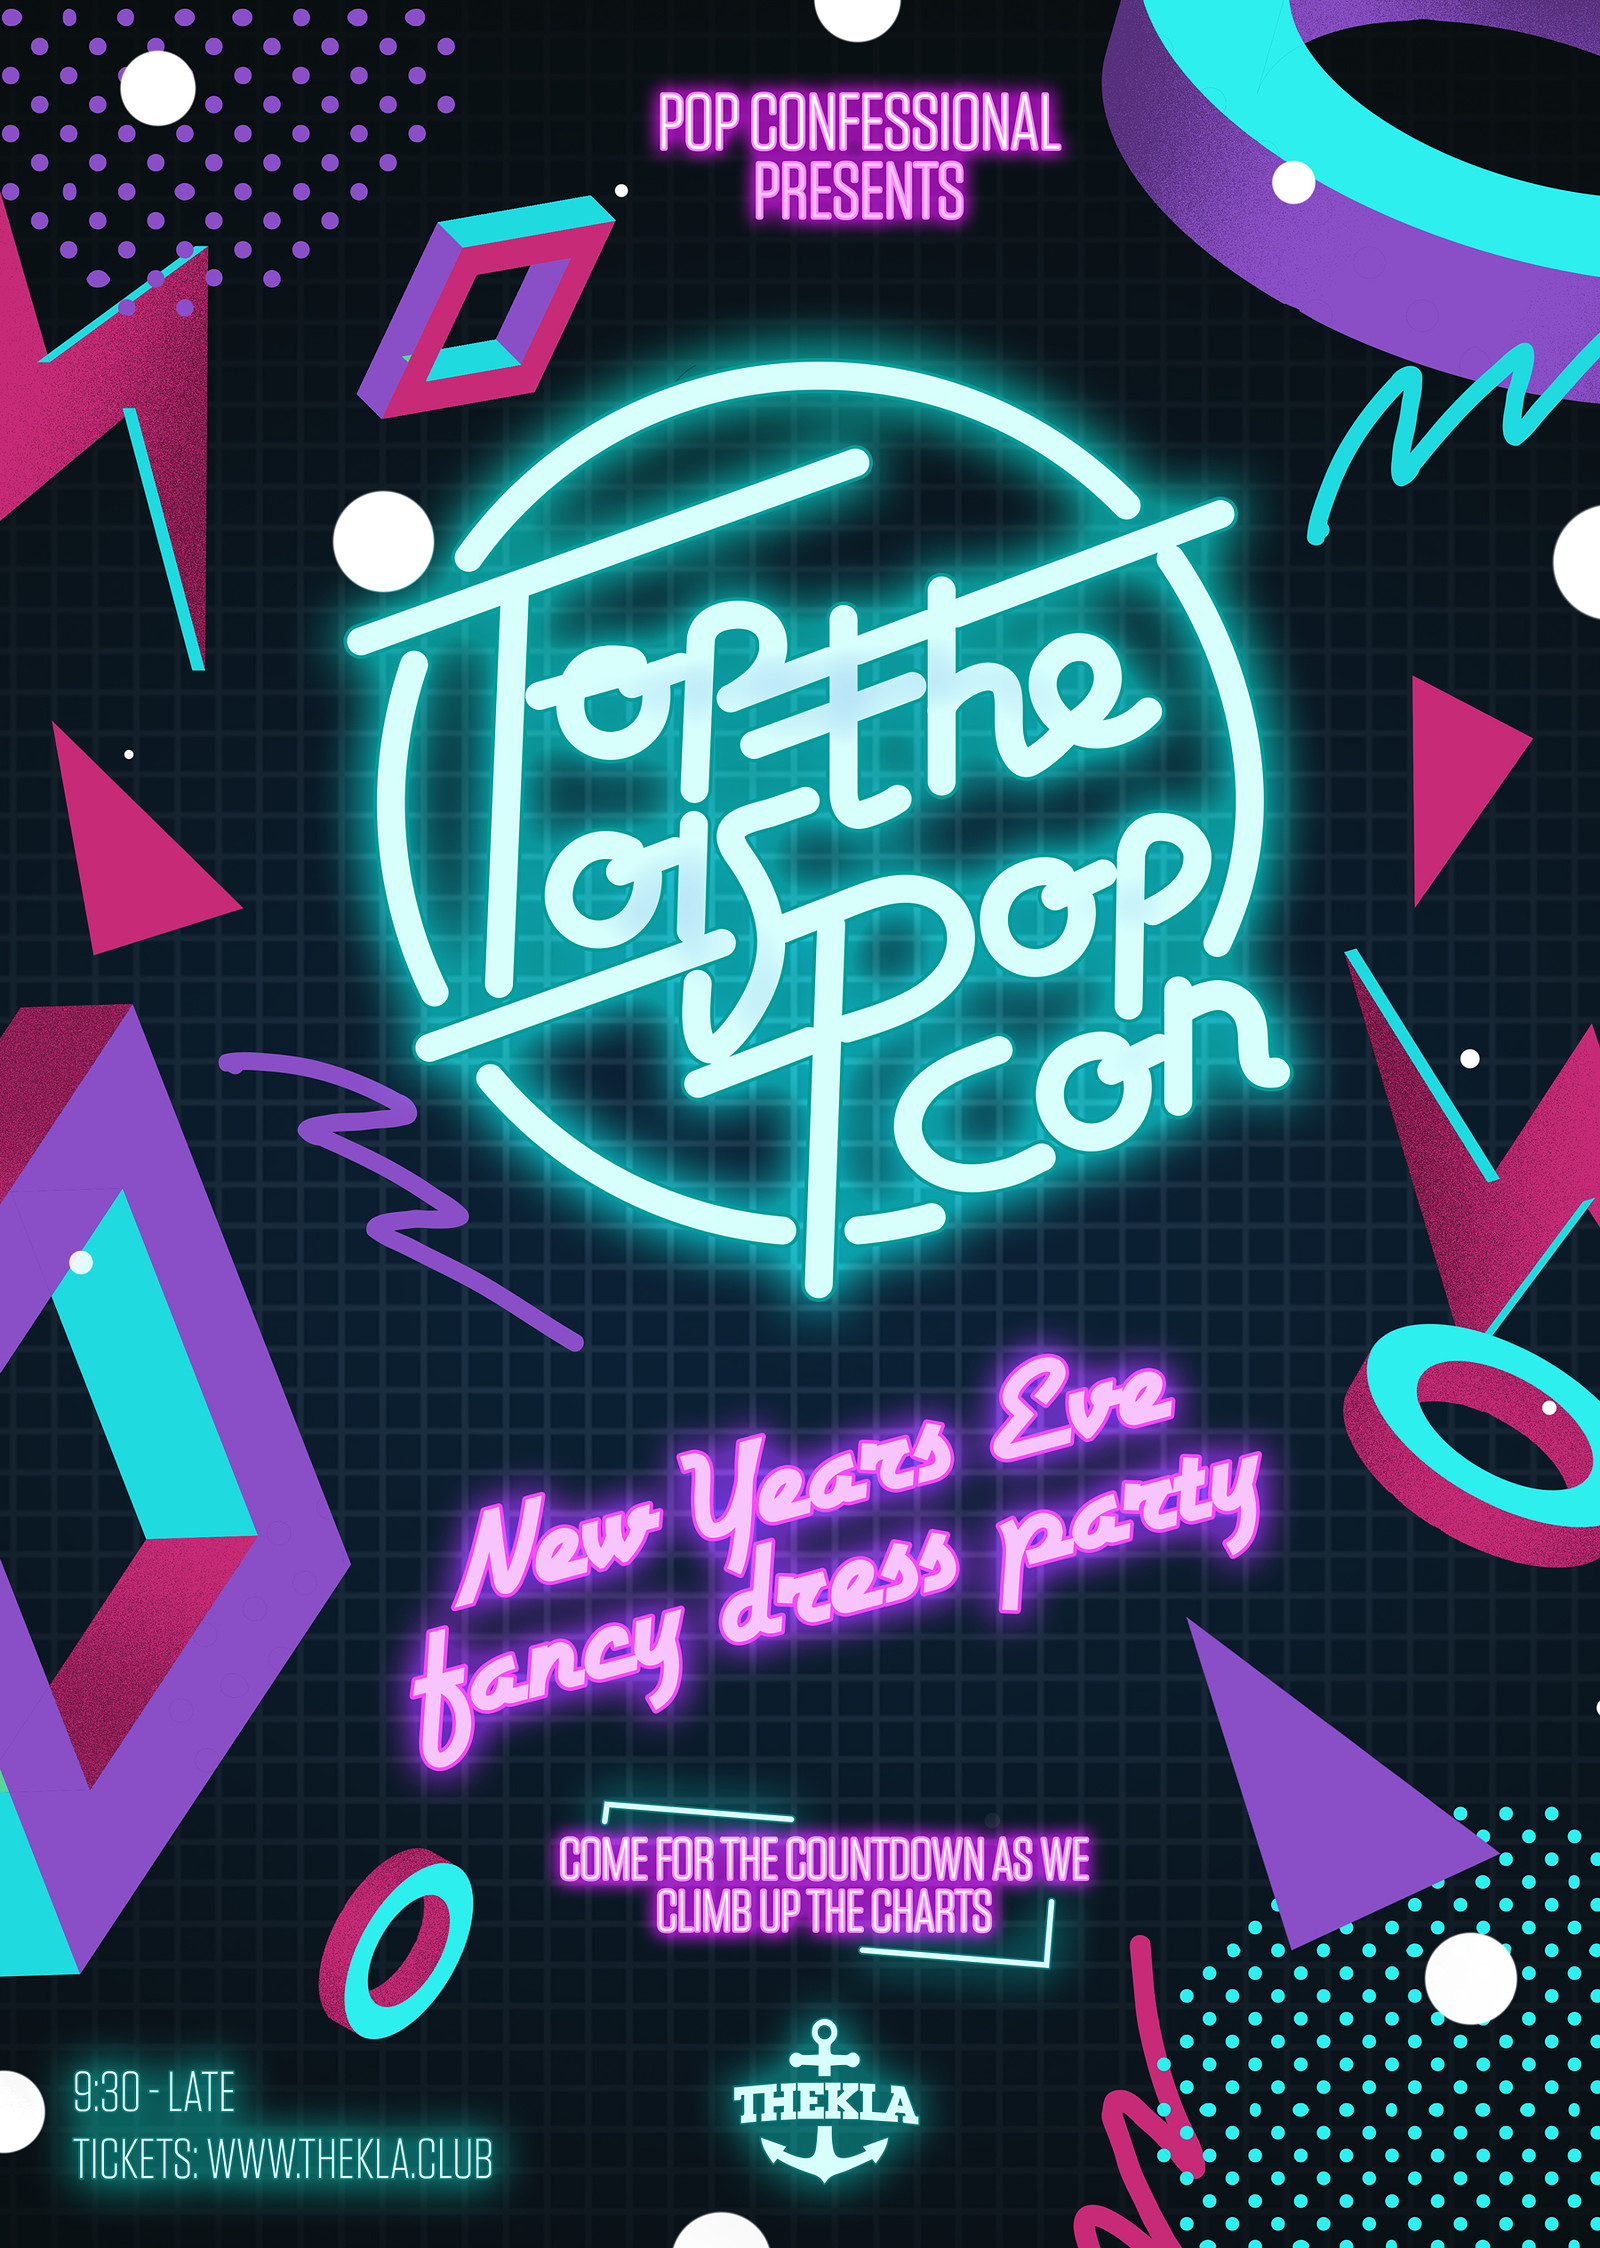 Top Of The Pop Con - NYE Fancy Dress Party 2017 at Thekla